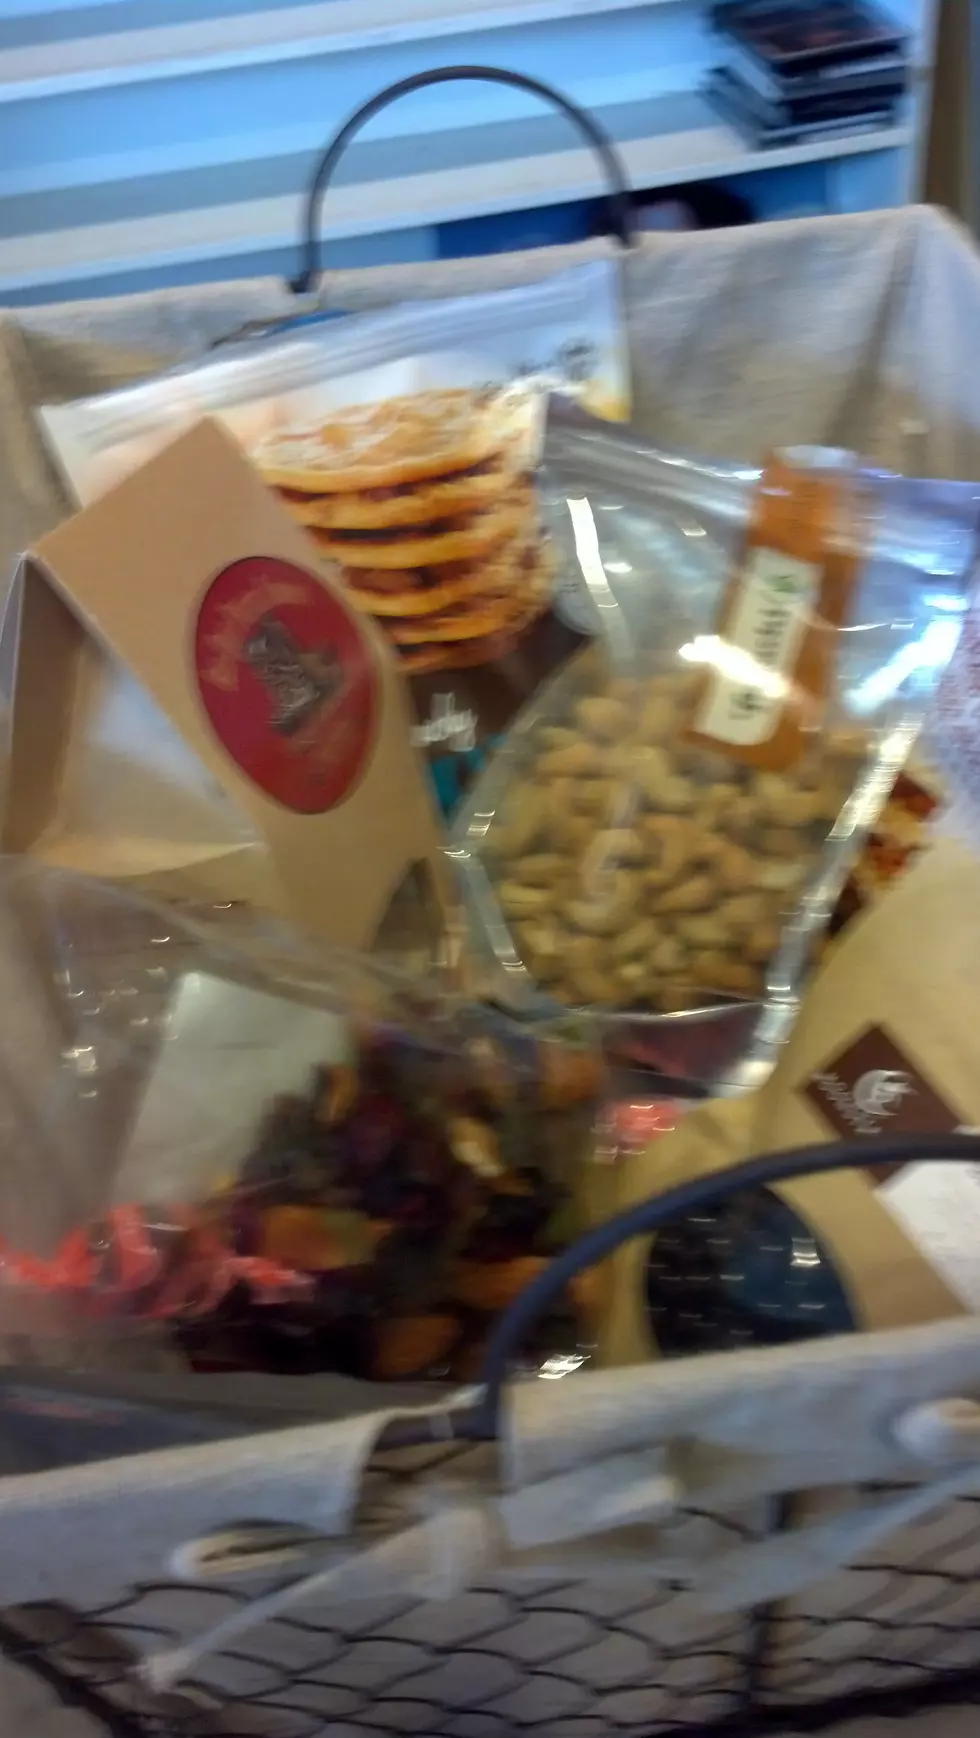 When a Basket of Goodies Comes to the Office What do you Grab? [POLL]